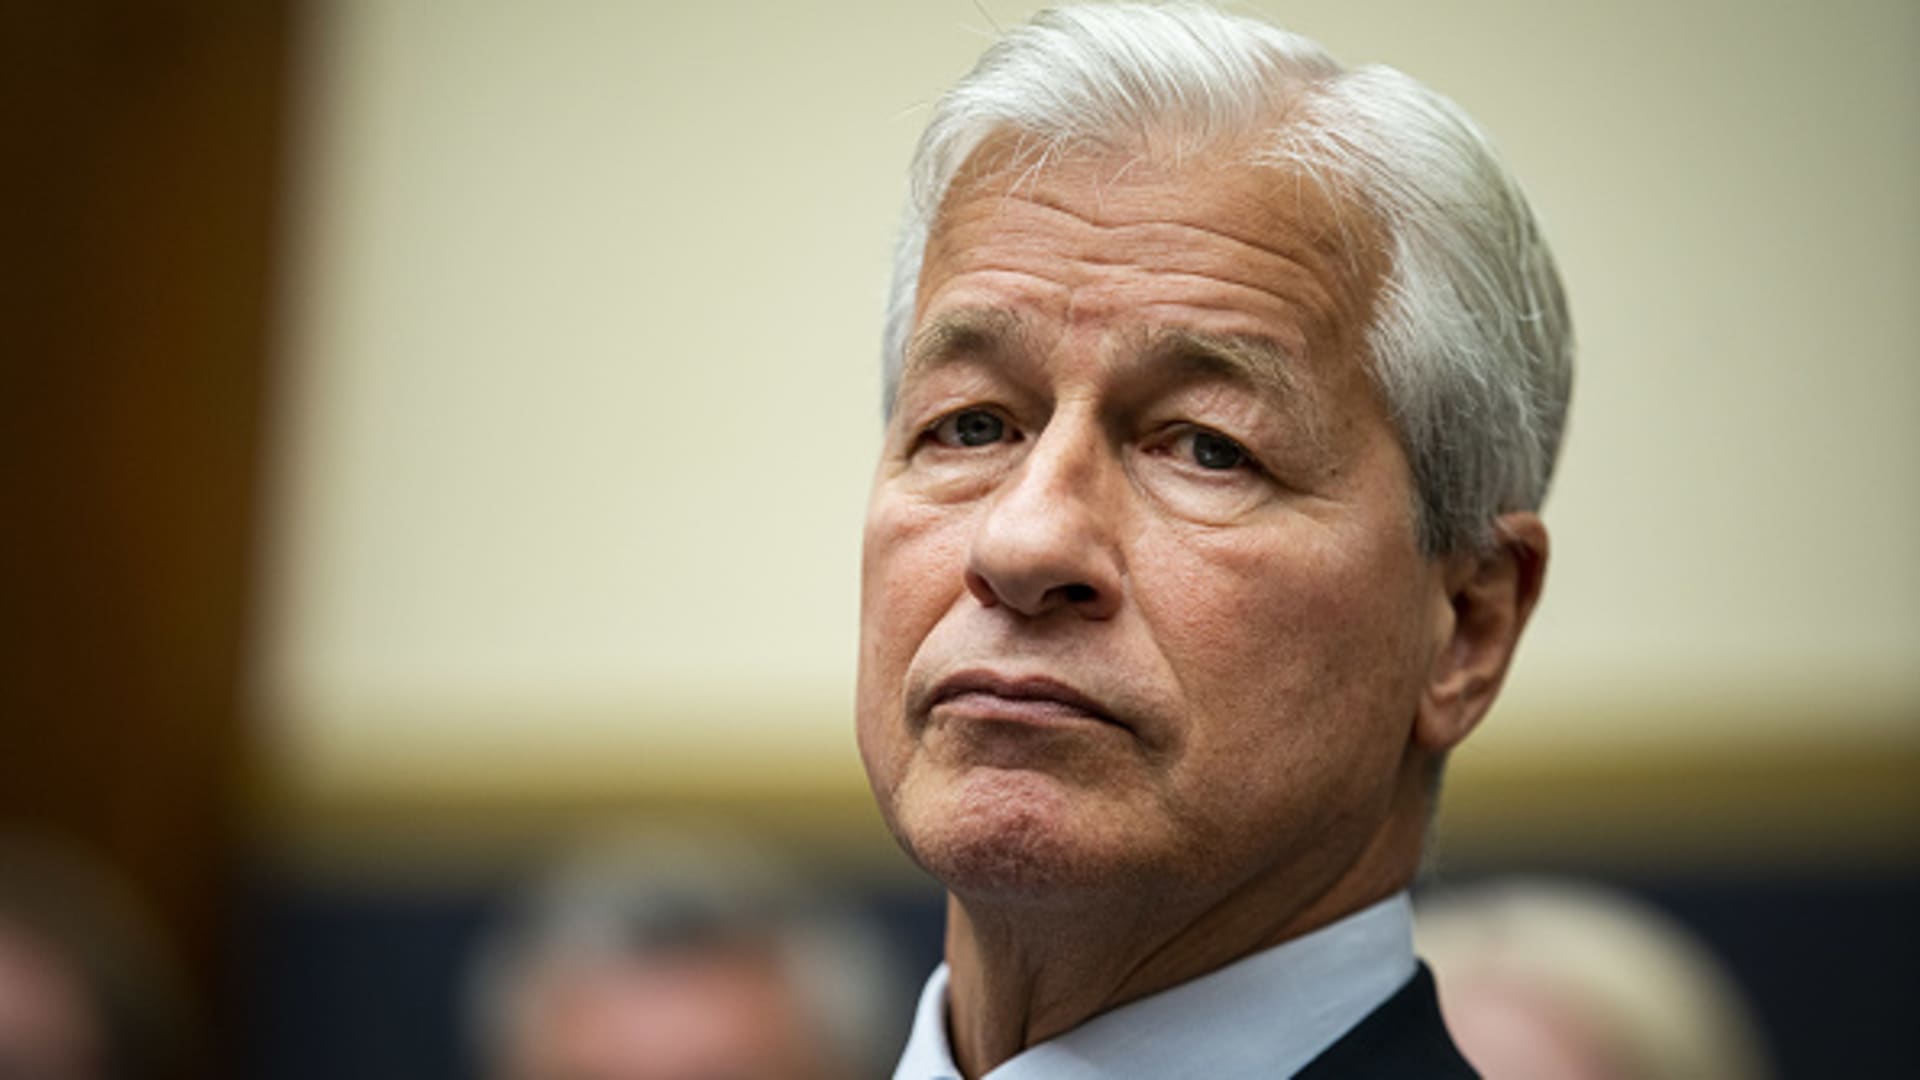 Jamie Dimon says Ukraine war shows we still need cheap, secure energy from oil and gas